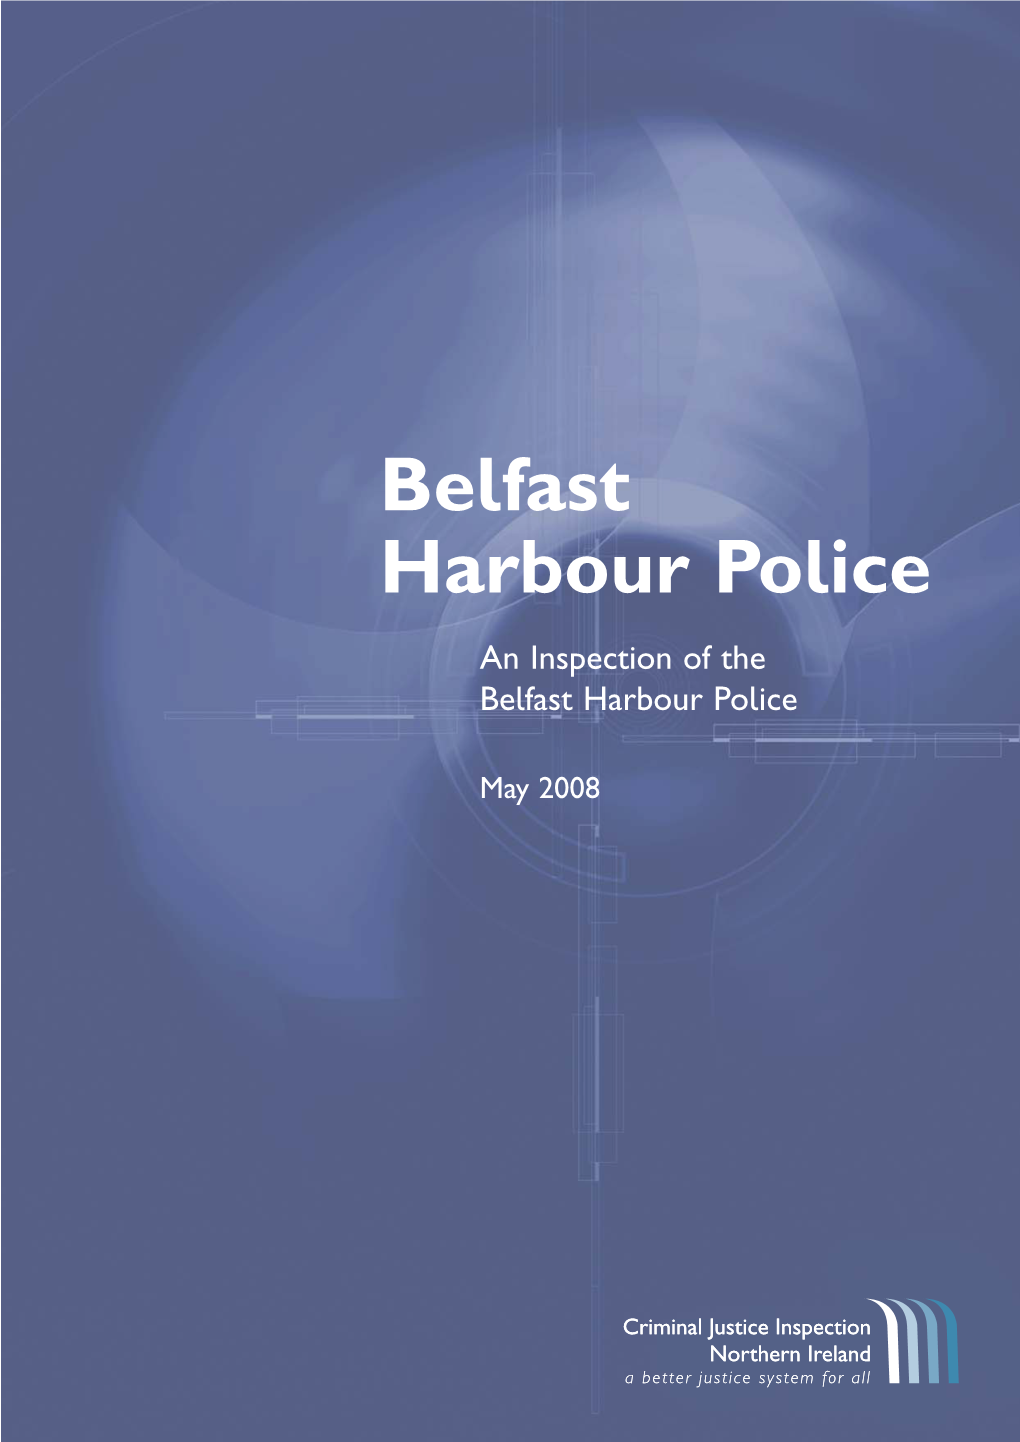 Belfast Harbour Police an Inspection of the Belfast Harbour Police